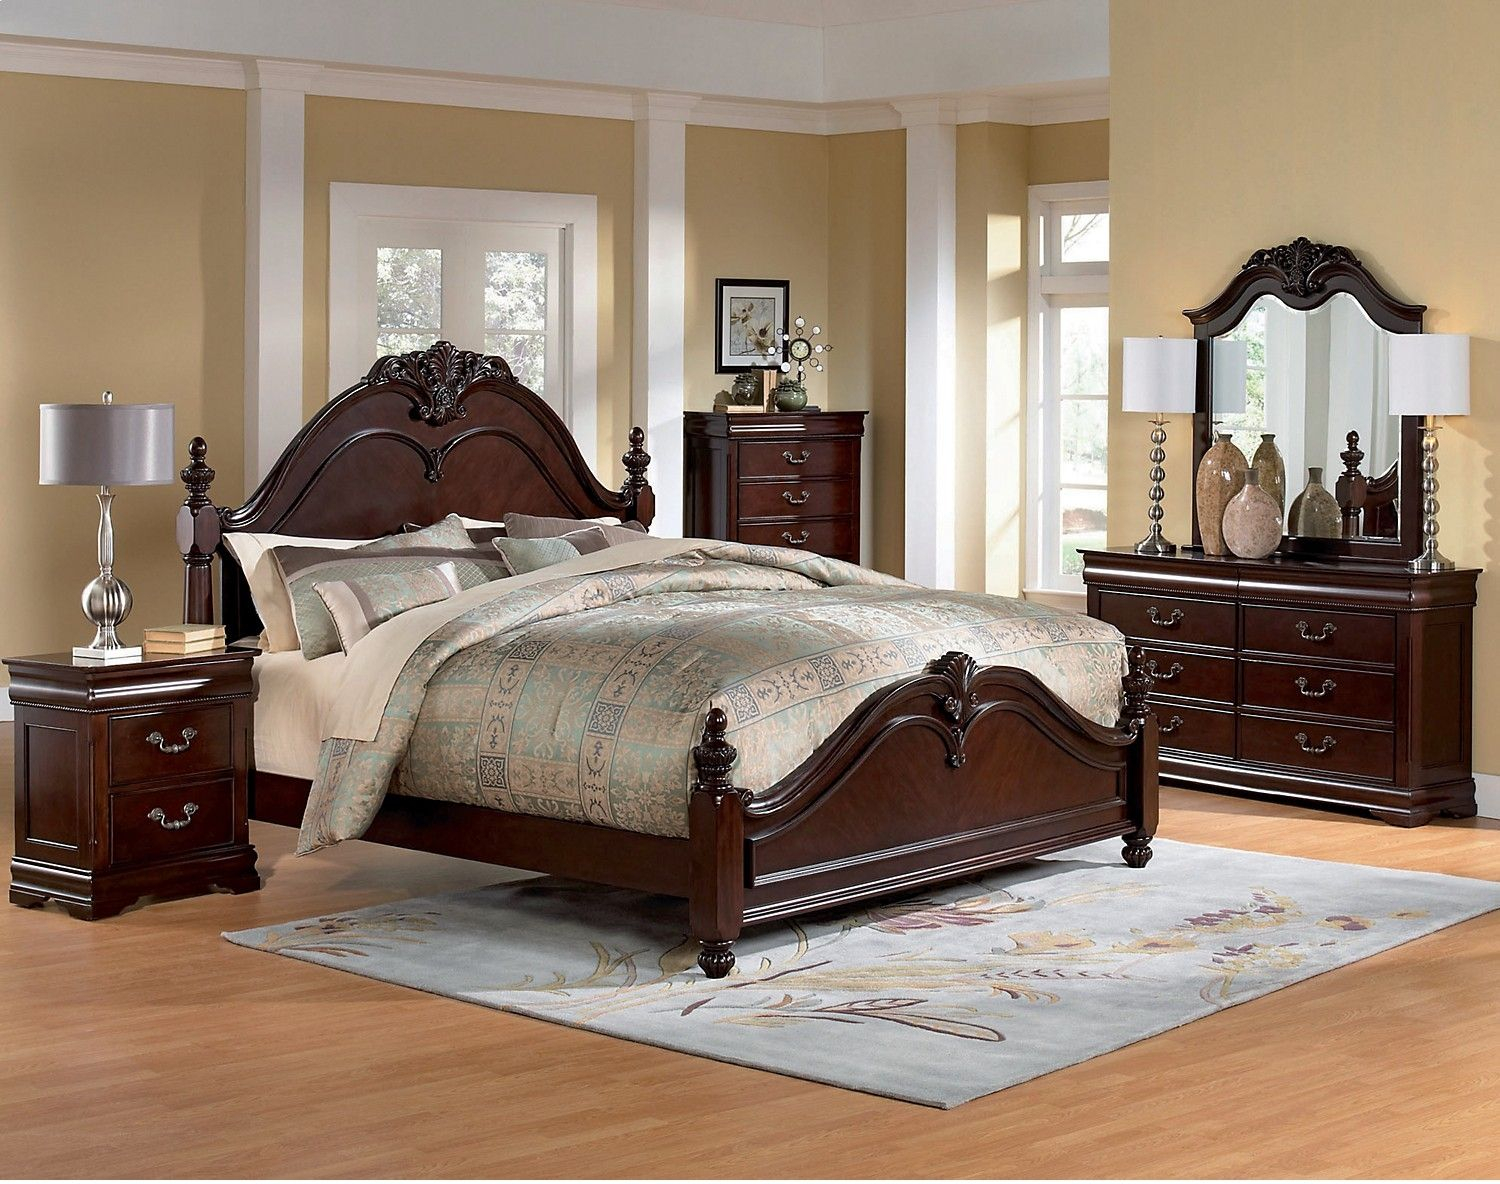 Westchester Piece King Bedroom Set United Furniture pertaining to dimensions 1500 X 1184